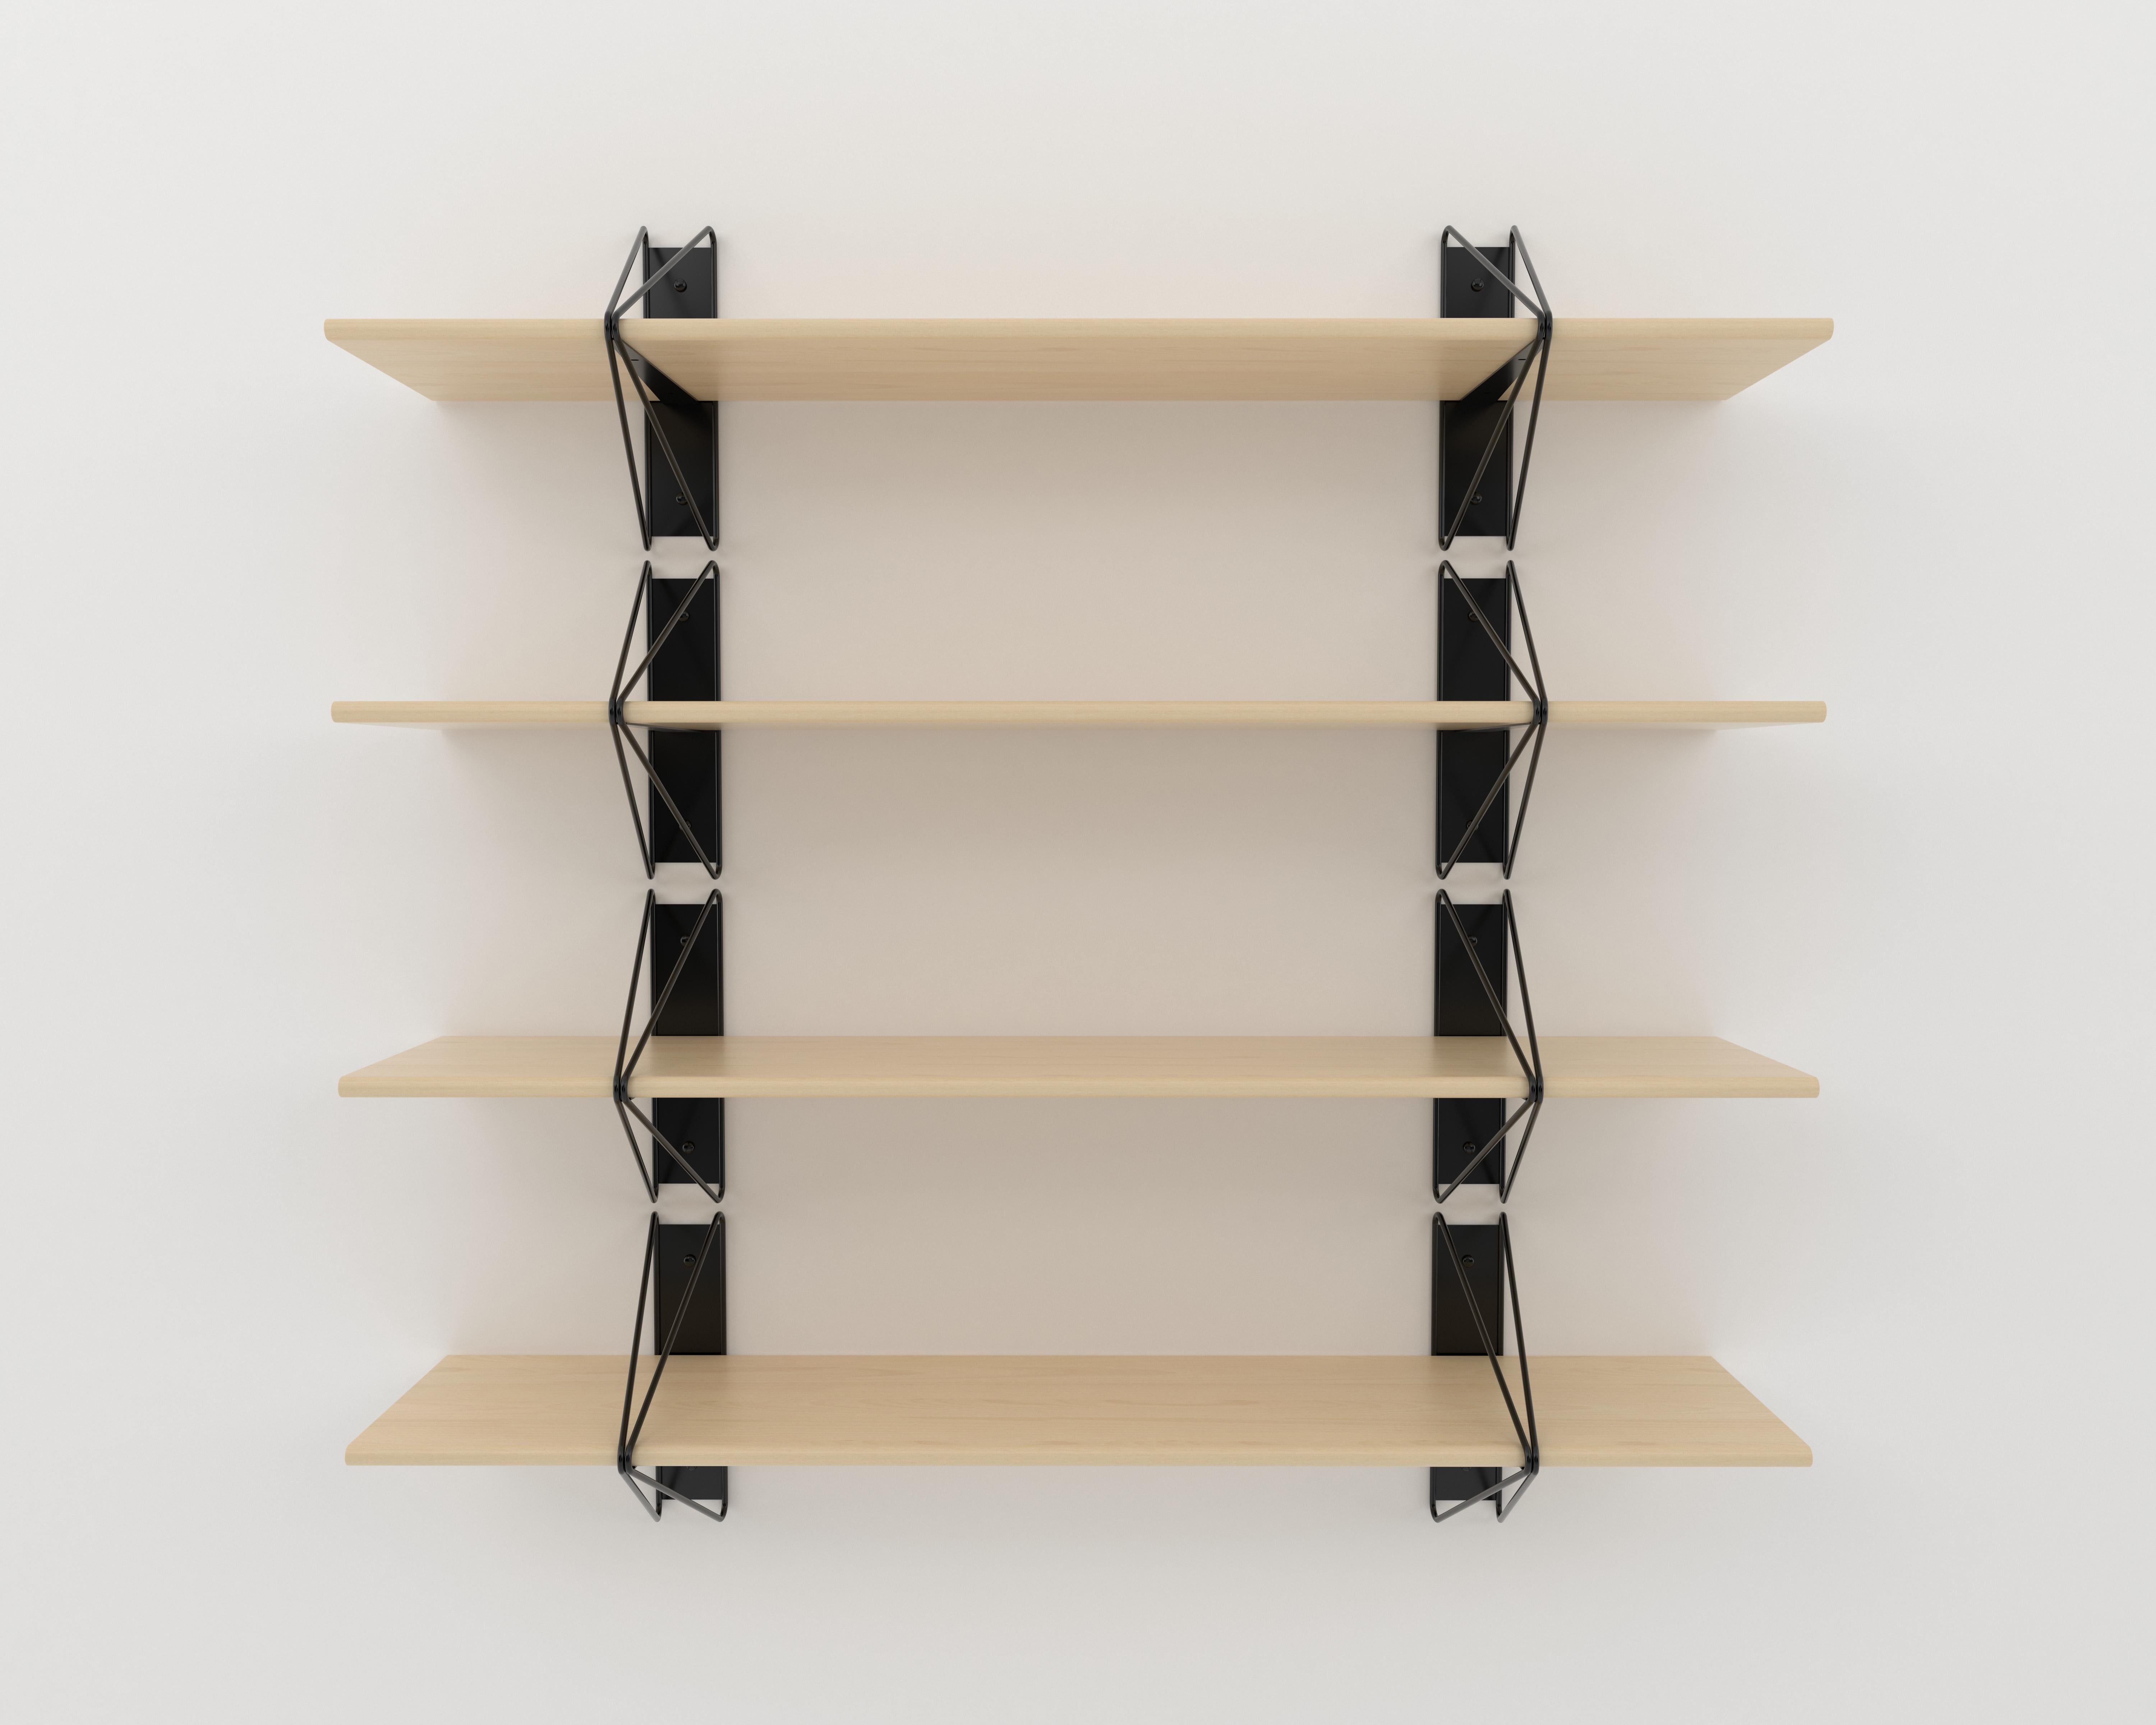 Powder-Coated Set of 4 Strut Shelves from Souda, Black and Walnut, Made to Order For Sale